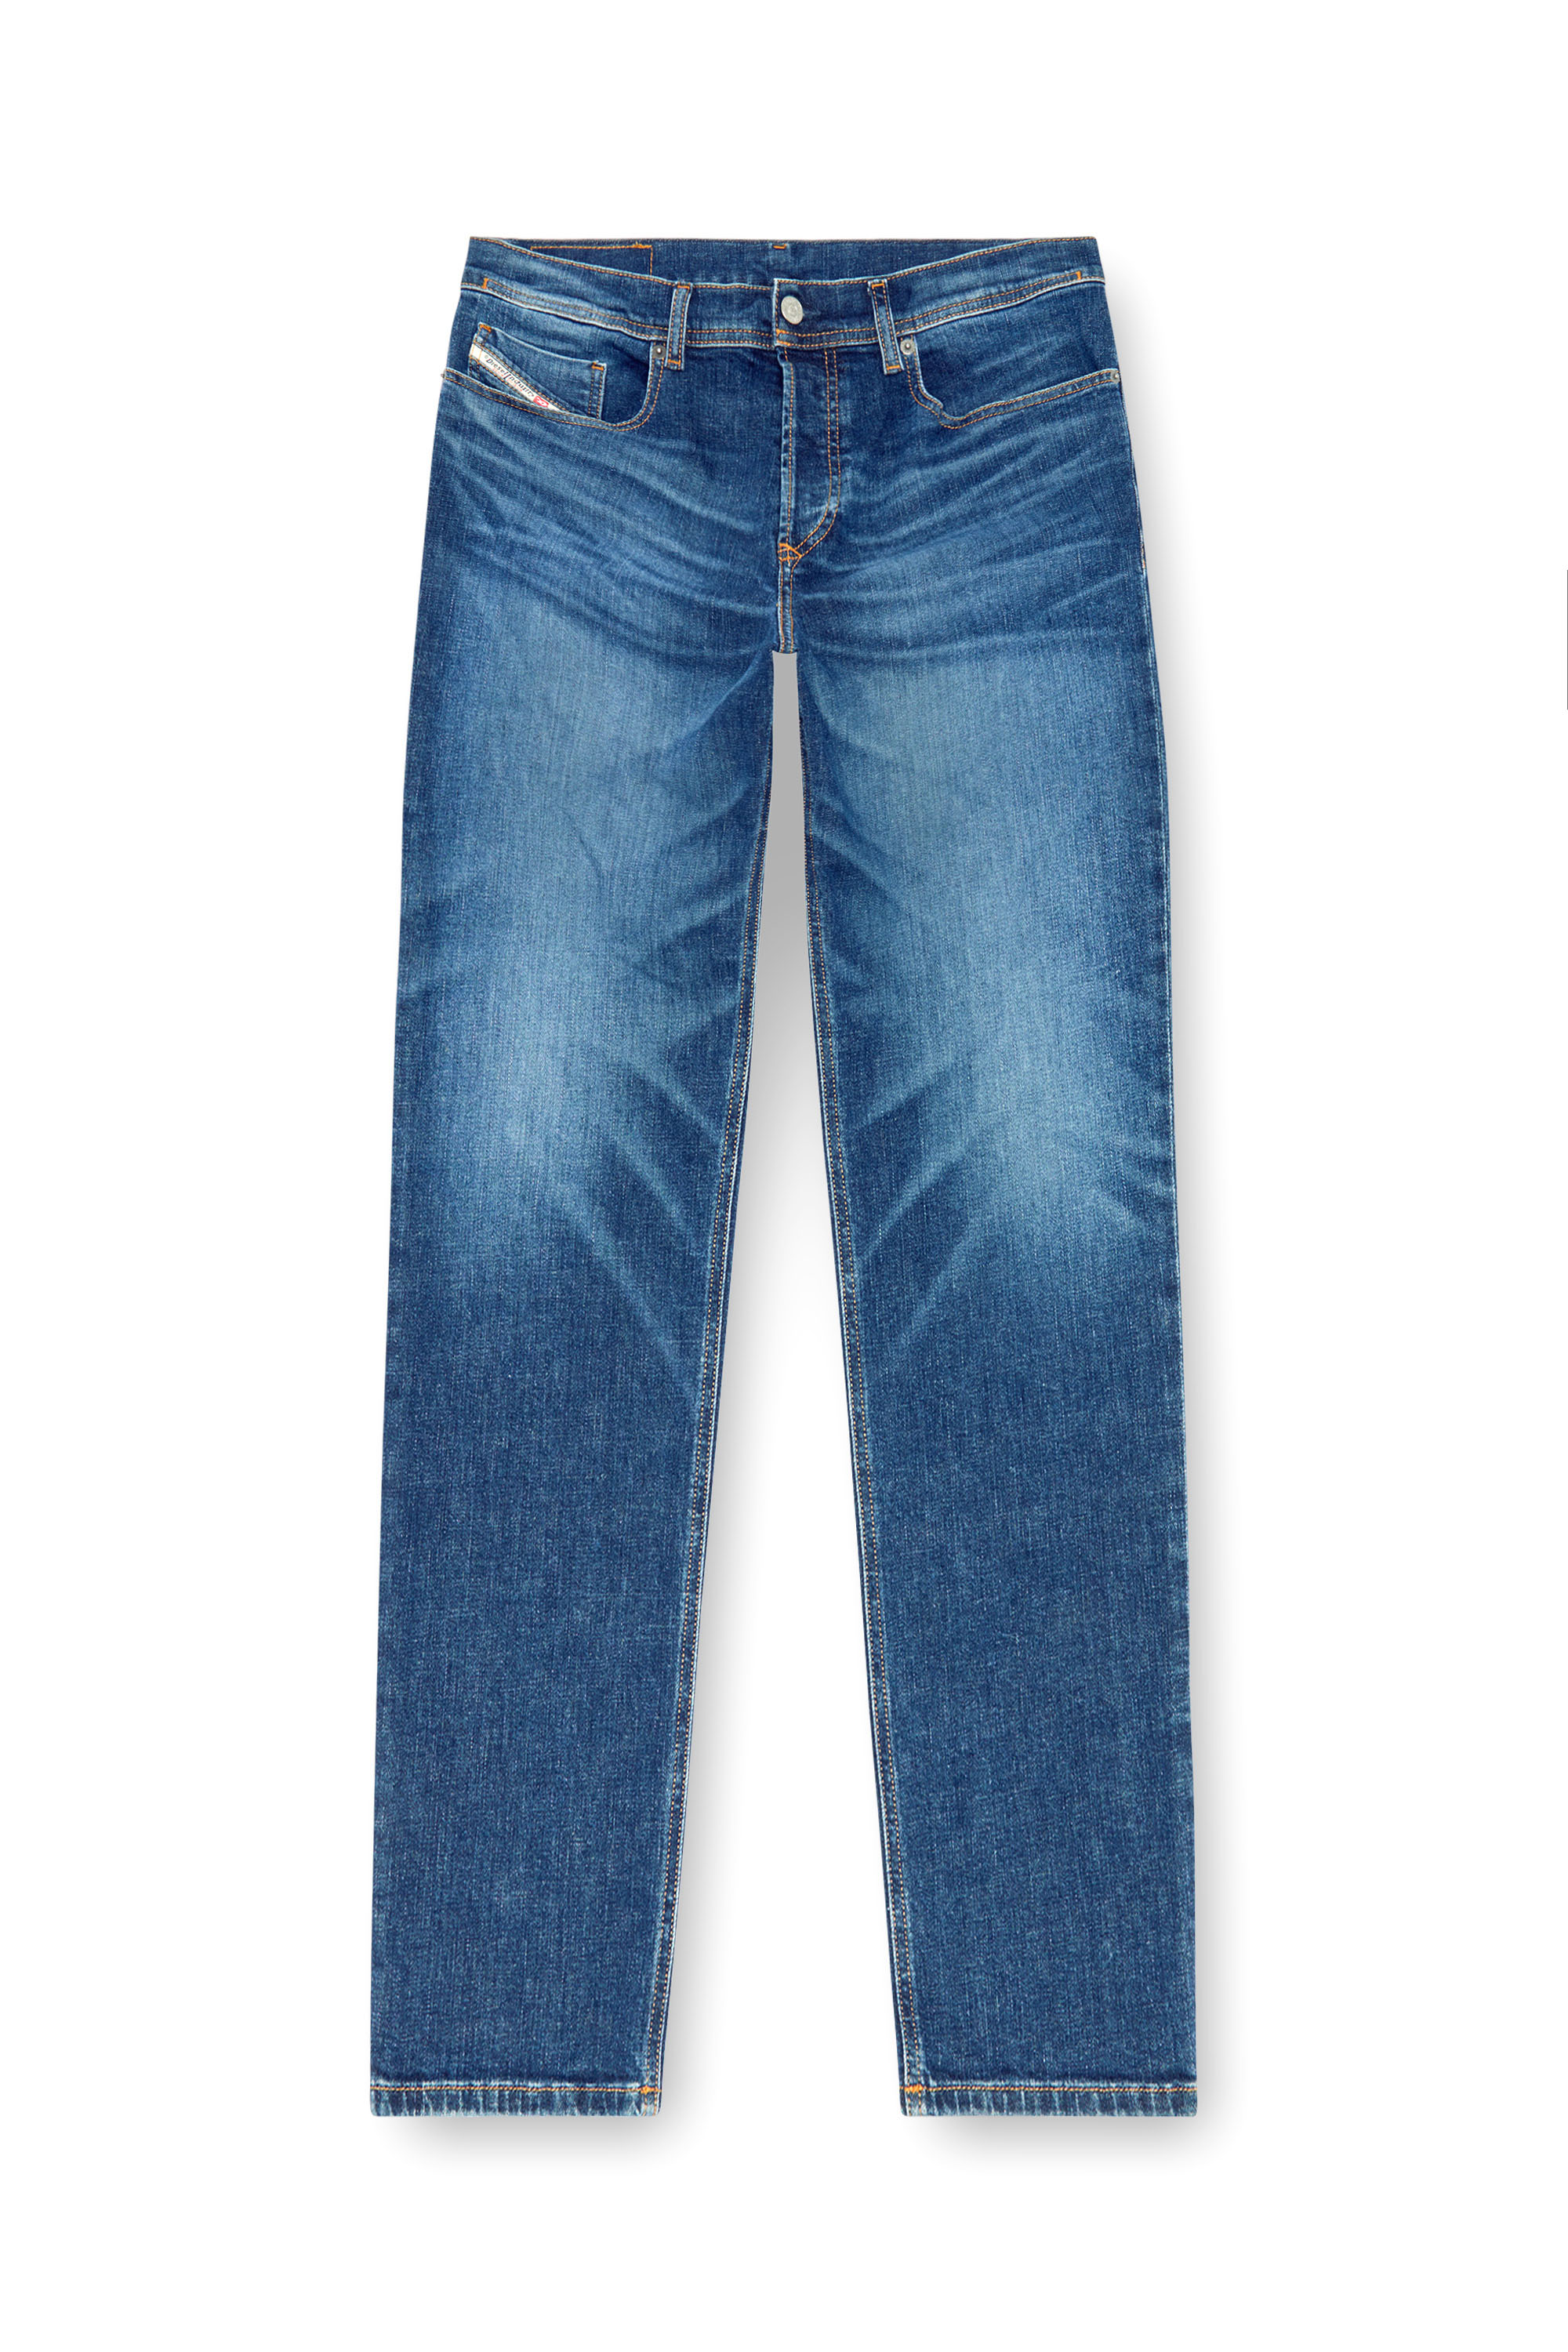 Diesel - Tapered Jeans 2023 D-Finitive 09J47, Hombre Tapered Jeans - 2023 D-Finitive in Azul marino - Image 3